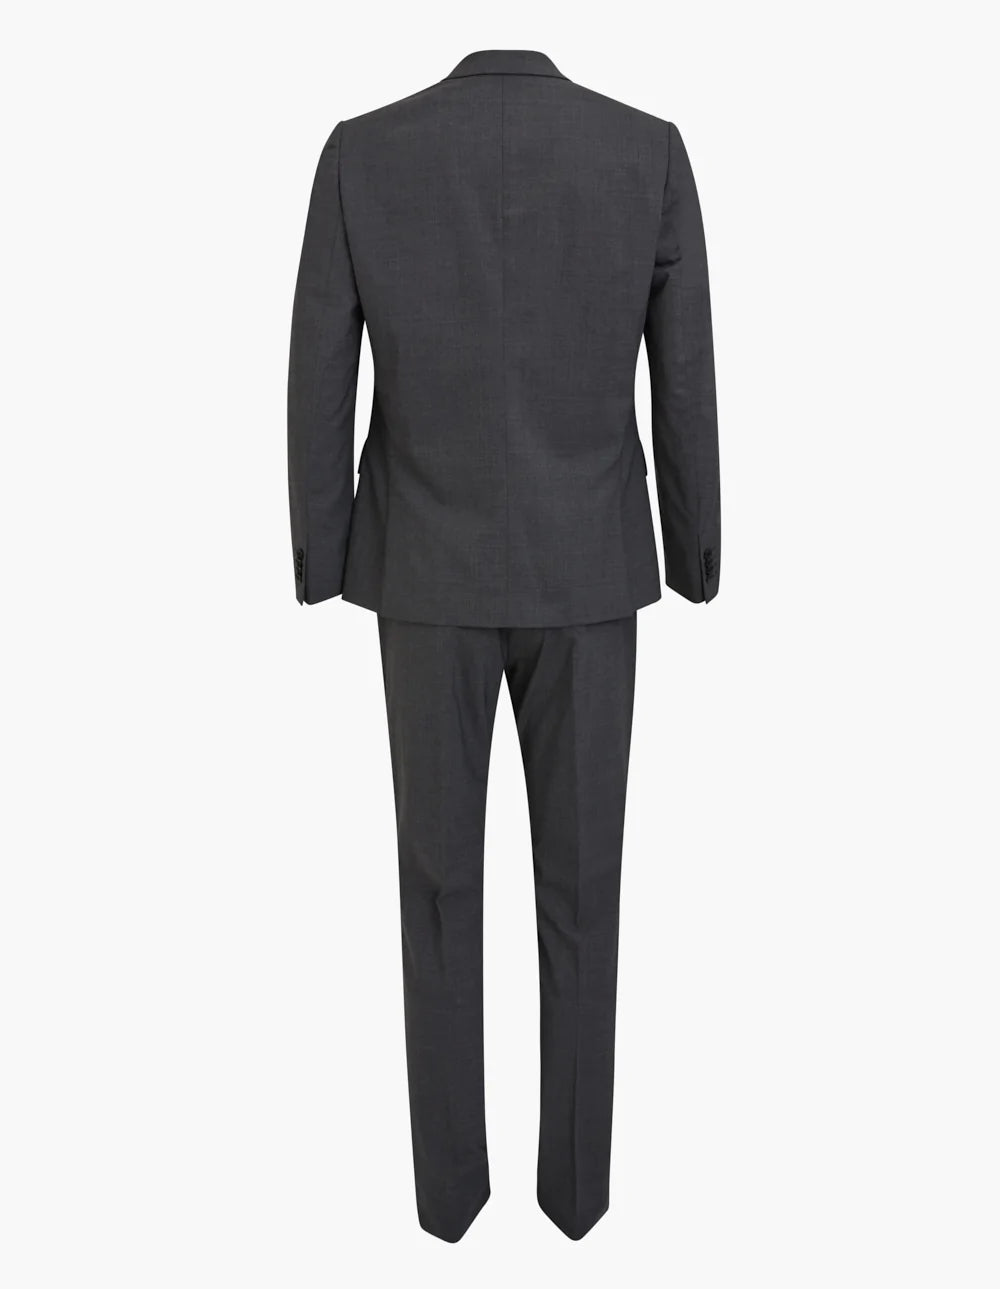 Paul Smith Tailored Fit 2 Button Suit Grey-2